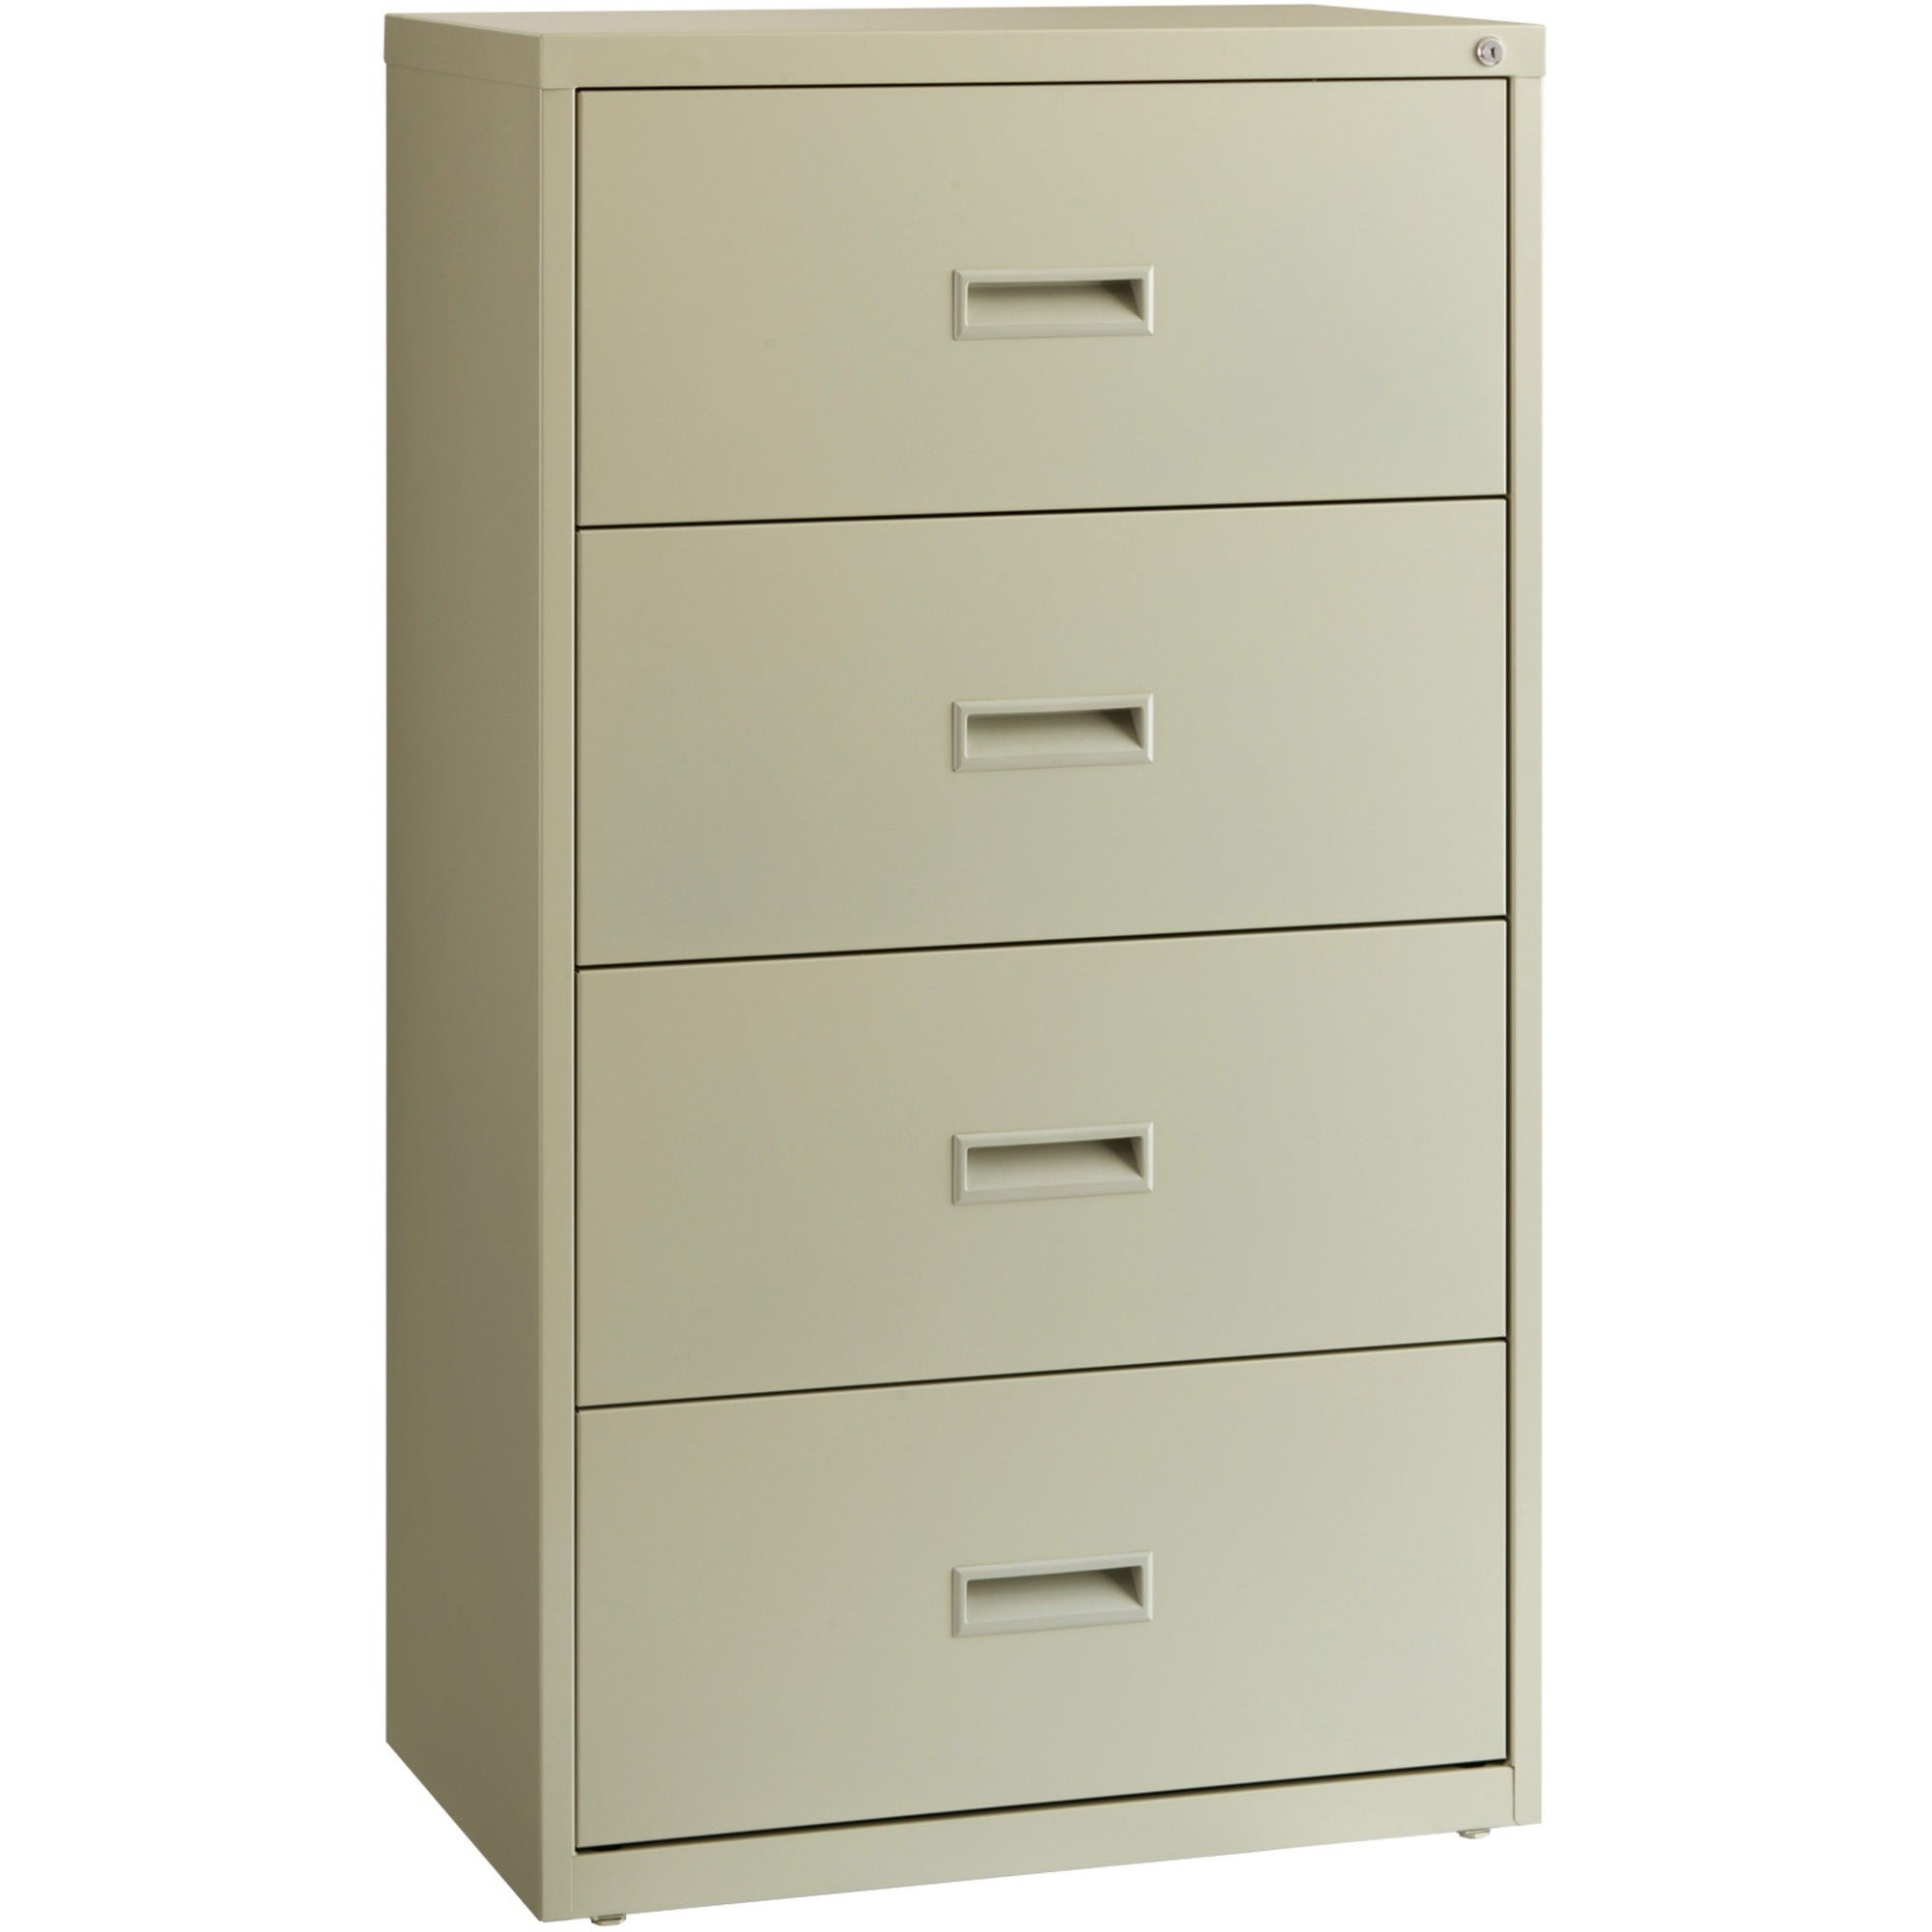 Lorell Value Lateral File - 2-Drawer - 30" x 18.6" x 52.5" - 4 x Drawer(s) for File - A4, Legal, Letter - Interlocking, Adjustable Glide, Ball-bearing Suspension, Label Holder - Putty - Steel - Recycled - 